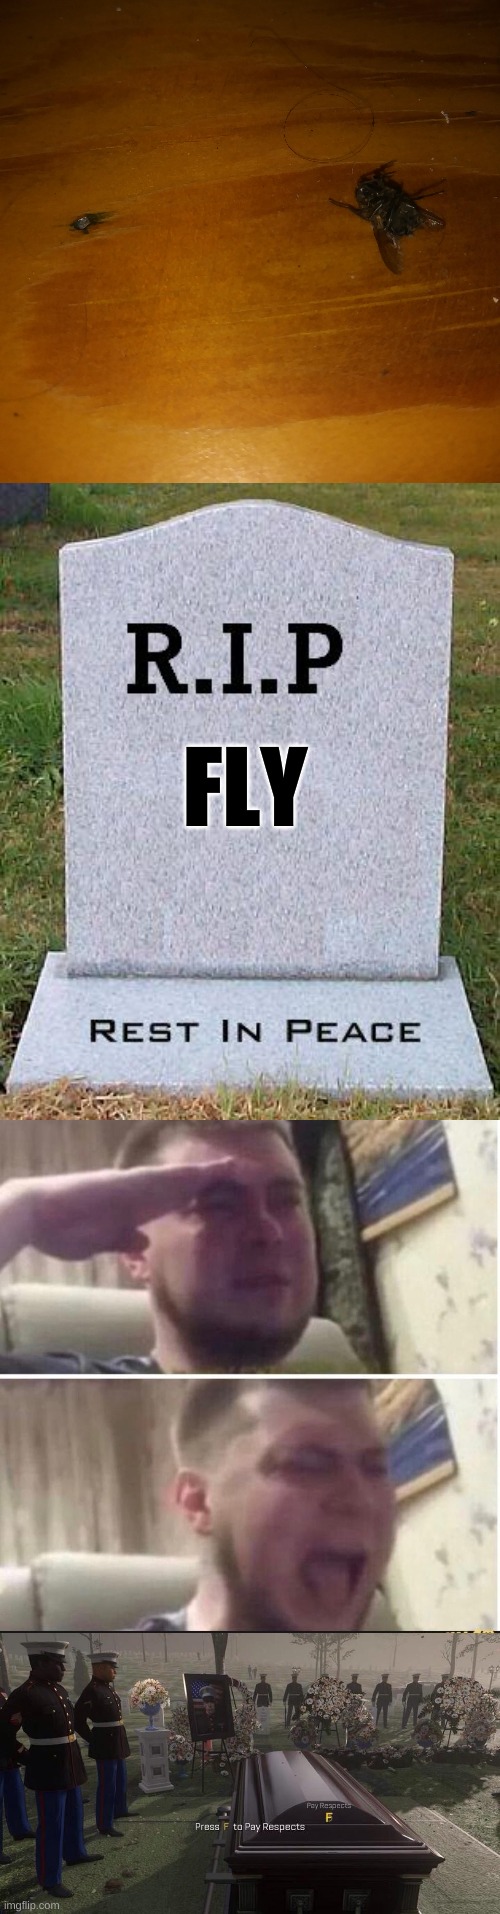 rip | FLY | image tagged in rip headstone,crying salute,press f to pay respects,sad,fly | made w/ Imgflip meme maker